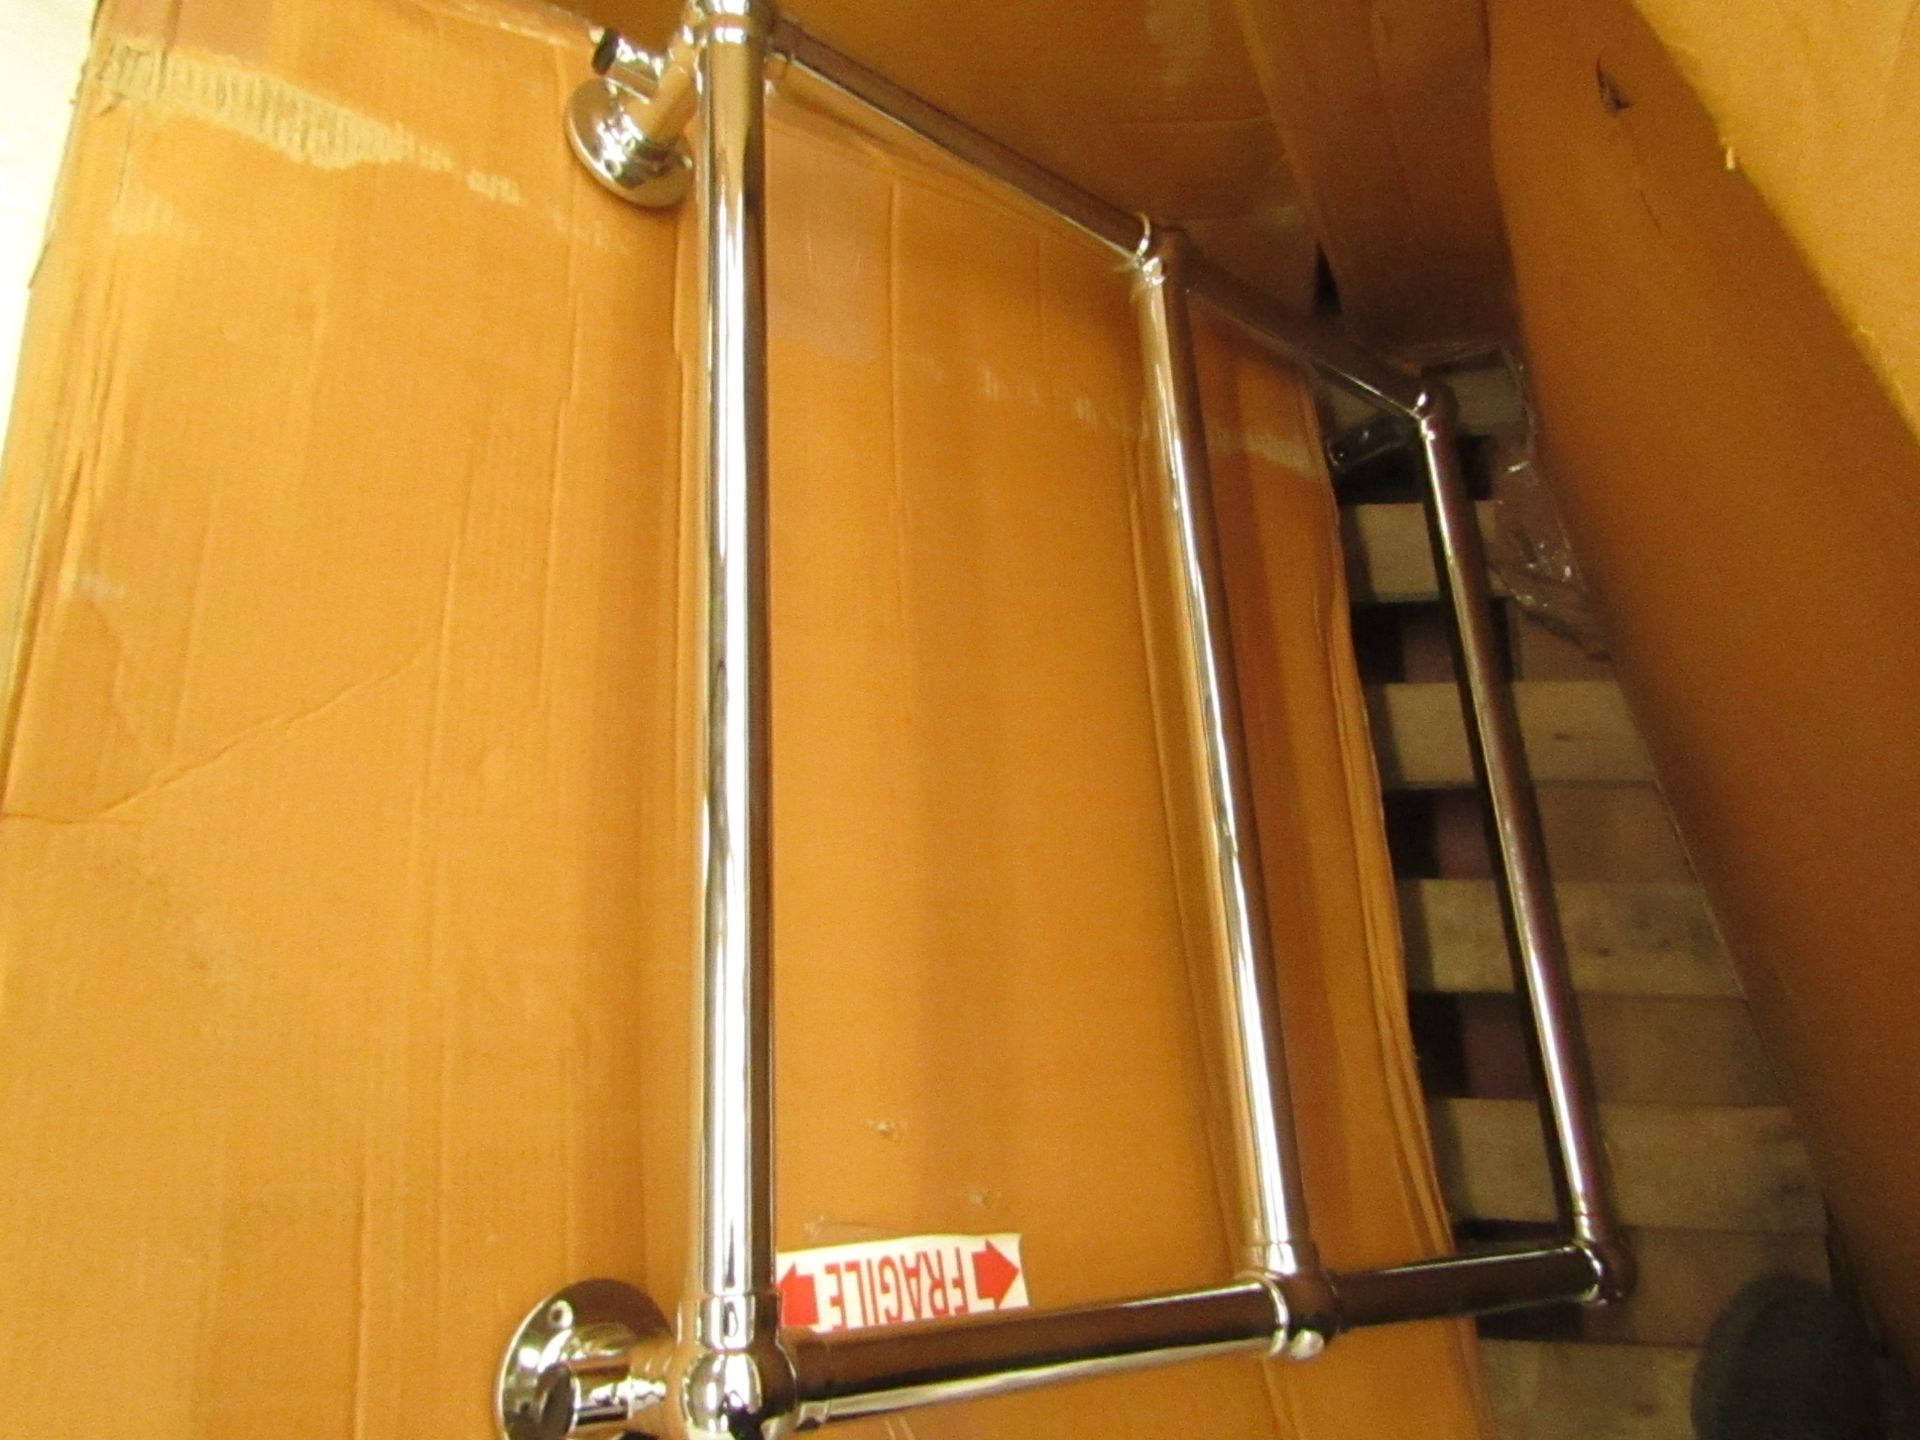 Hew Aster 685 x 685 towel radiator, item is unchecked and may contain marks, cosmetic damage and